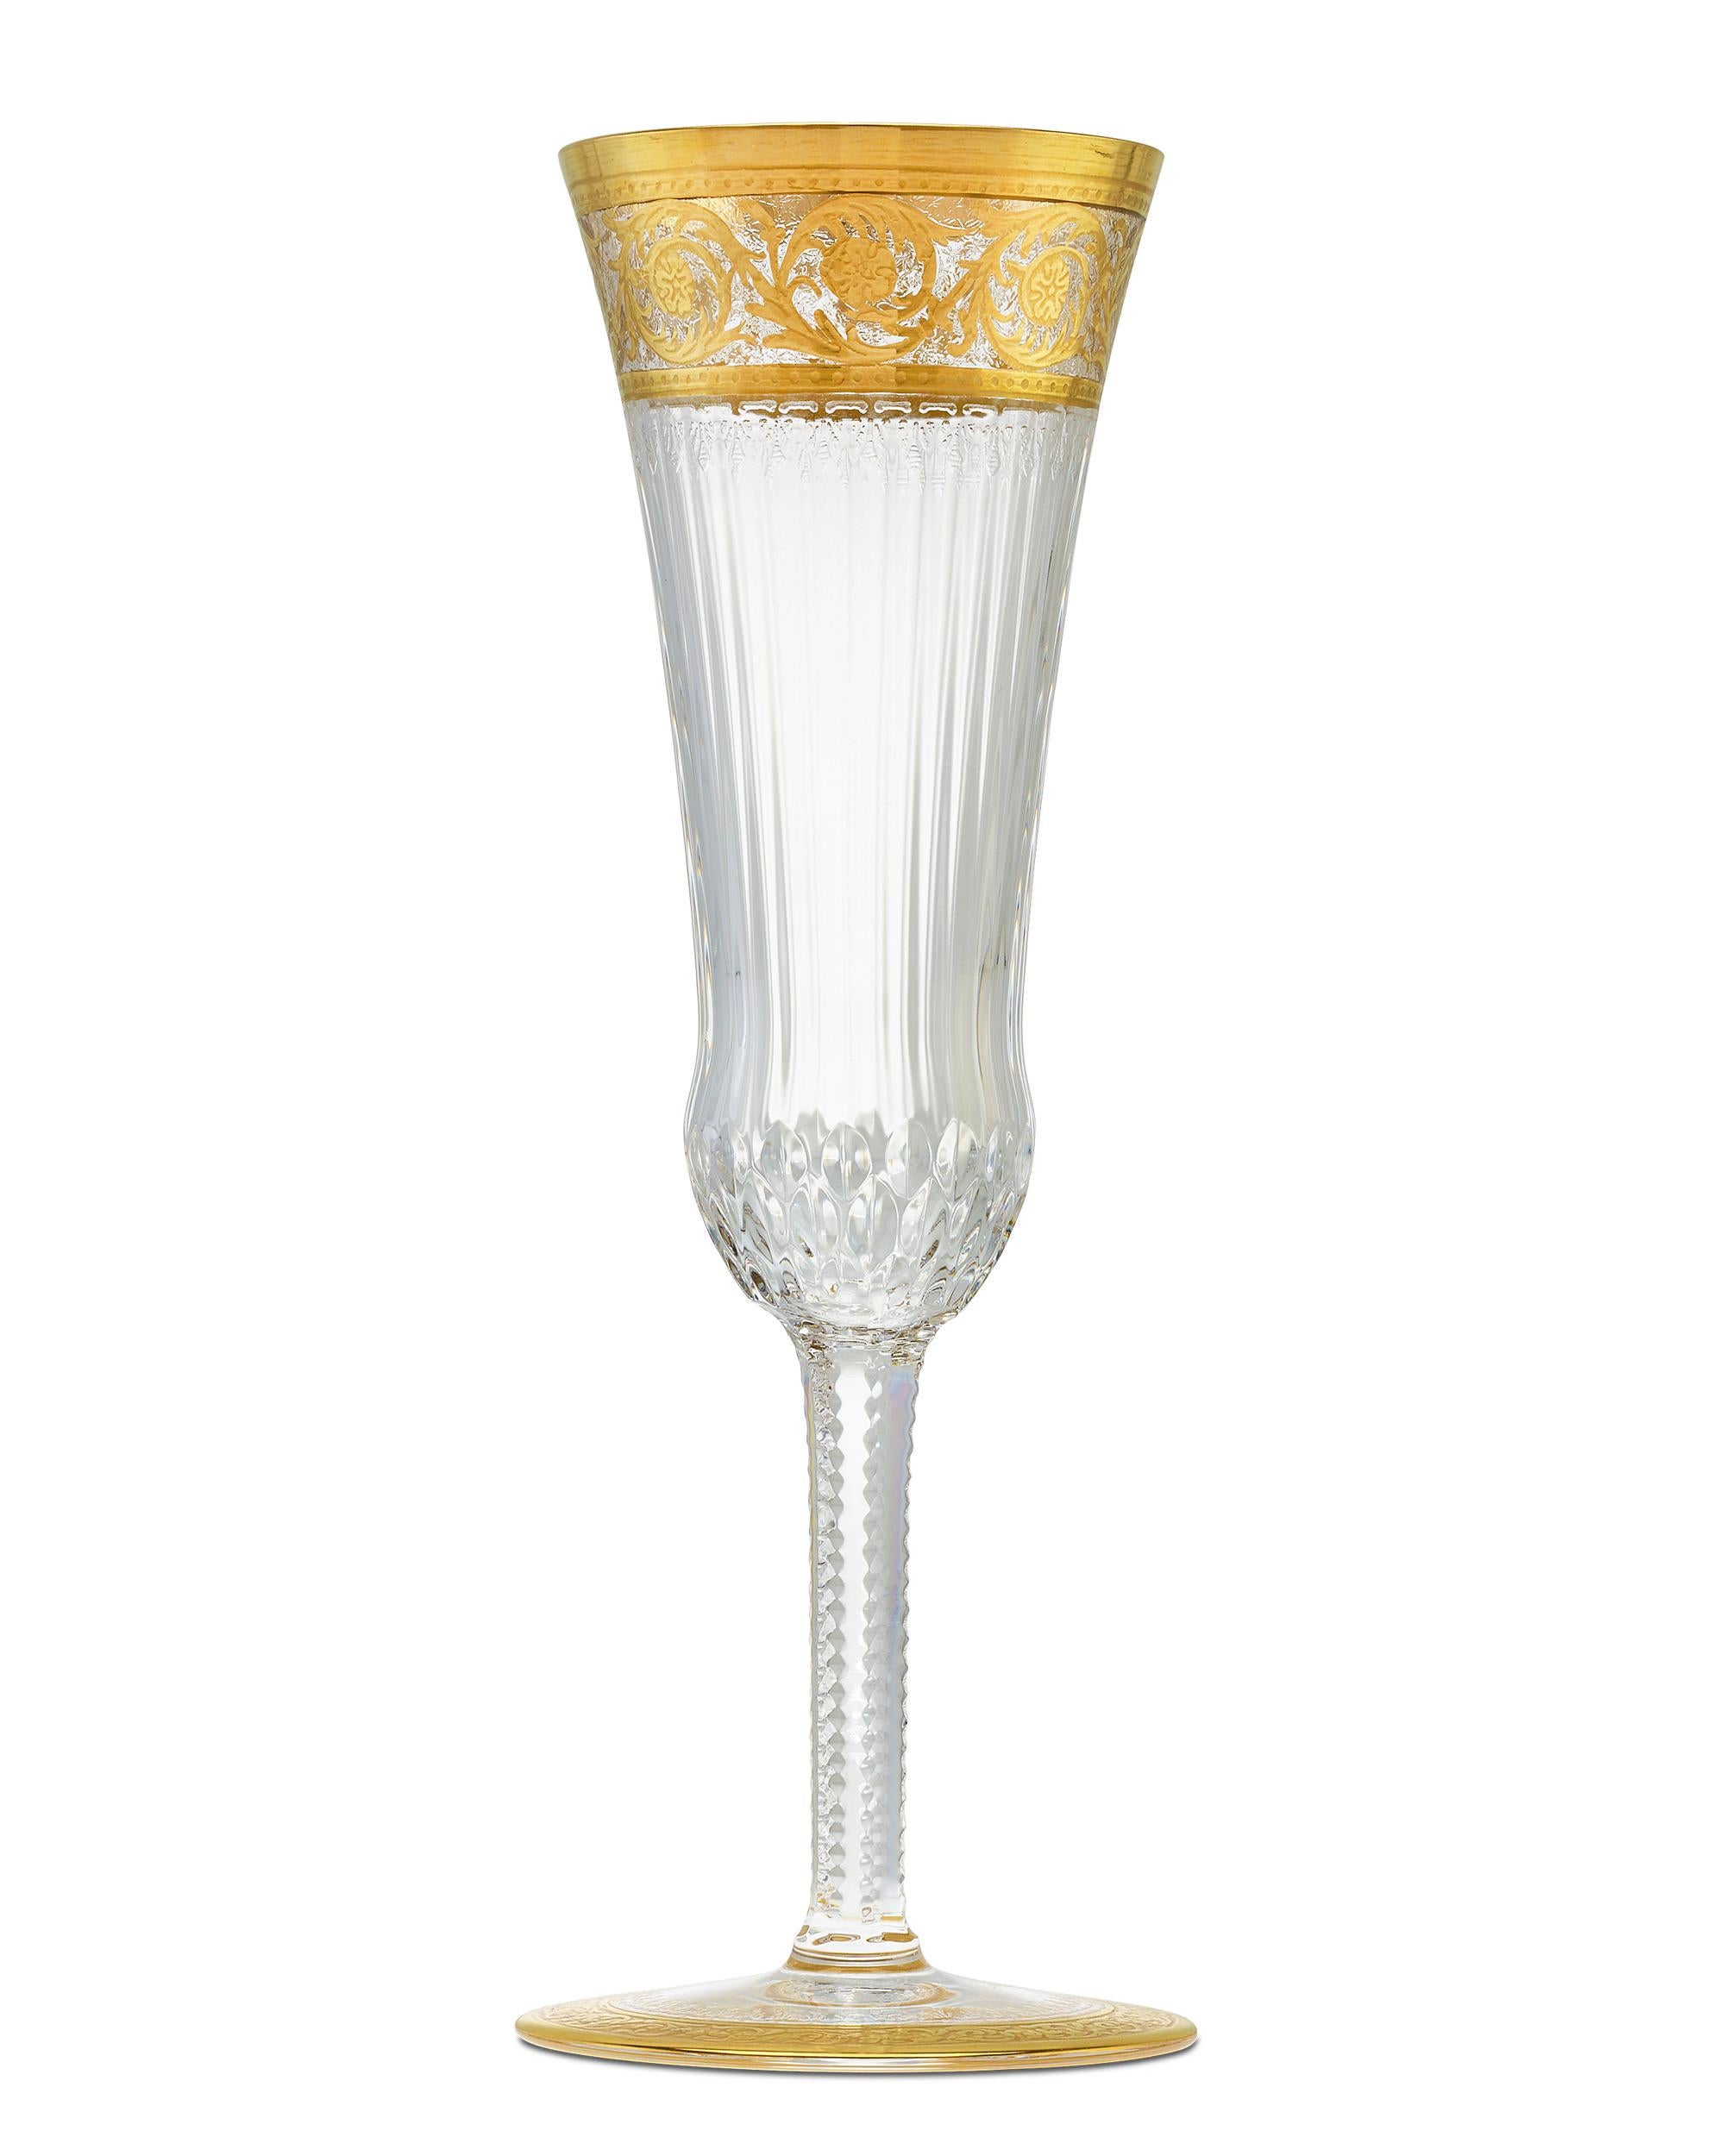 These beautifully designed crystal champagne flutes were crafted in the Thistle pattern by the legendary French glass manufacturer Saint-Louis Crystal. The pattern was created for the International Exhibition of the East of France held in 1909 at